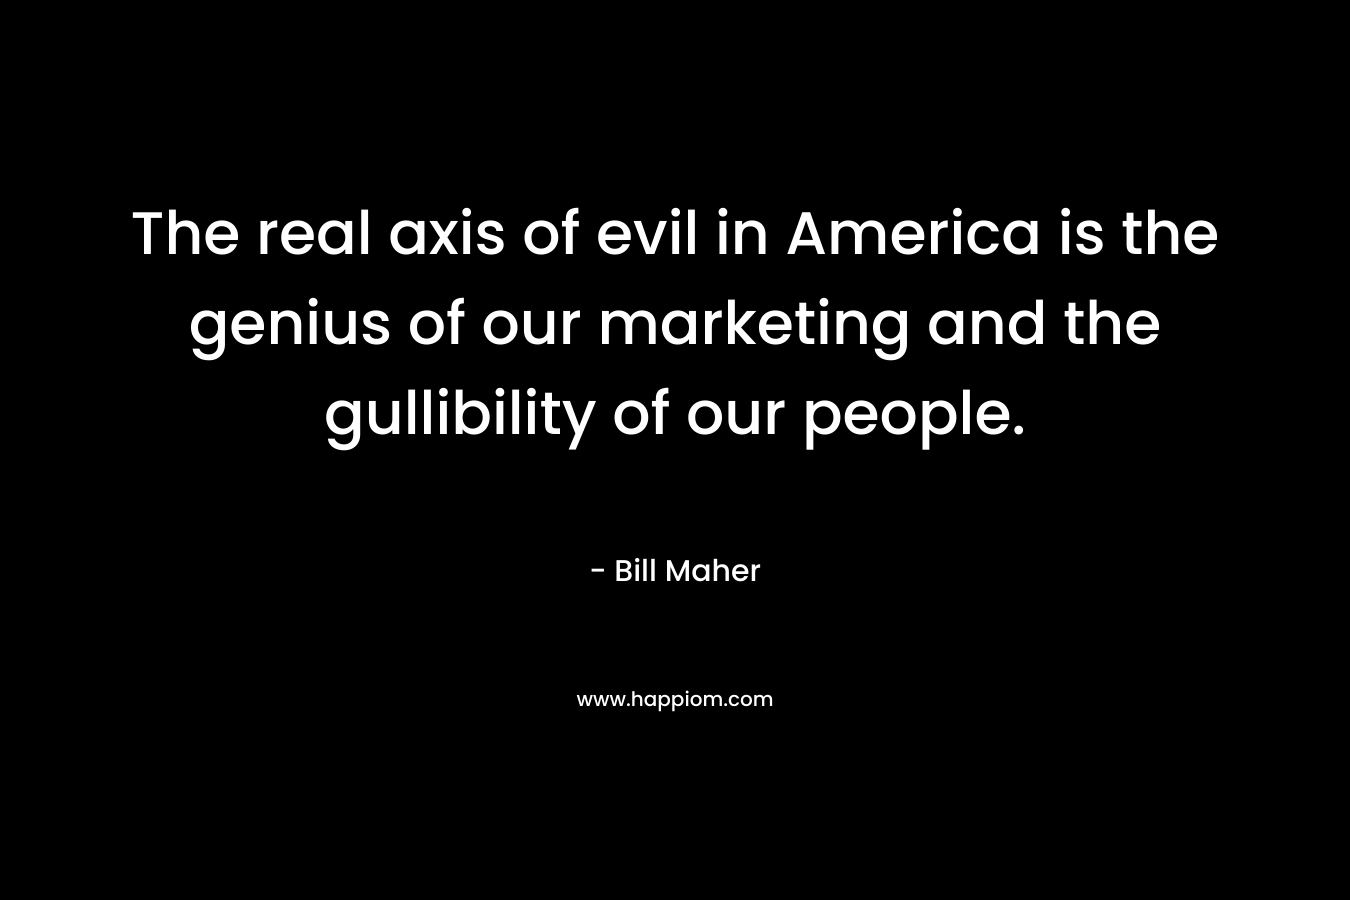 The real axis of evil in America is the genius of our marketing and the gullibility of our people. – Bill Maher